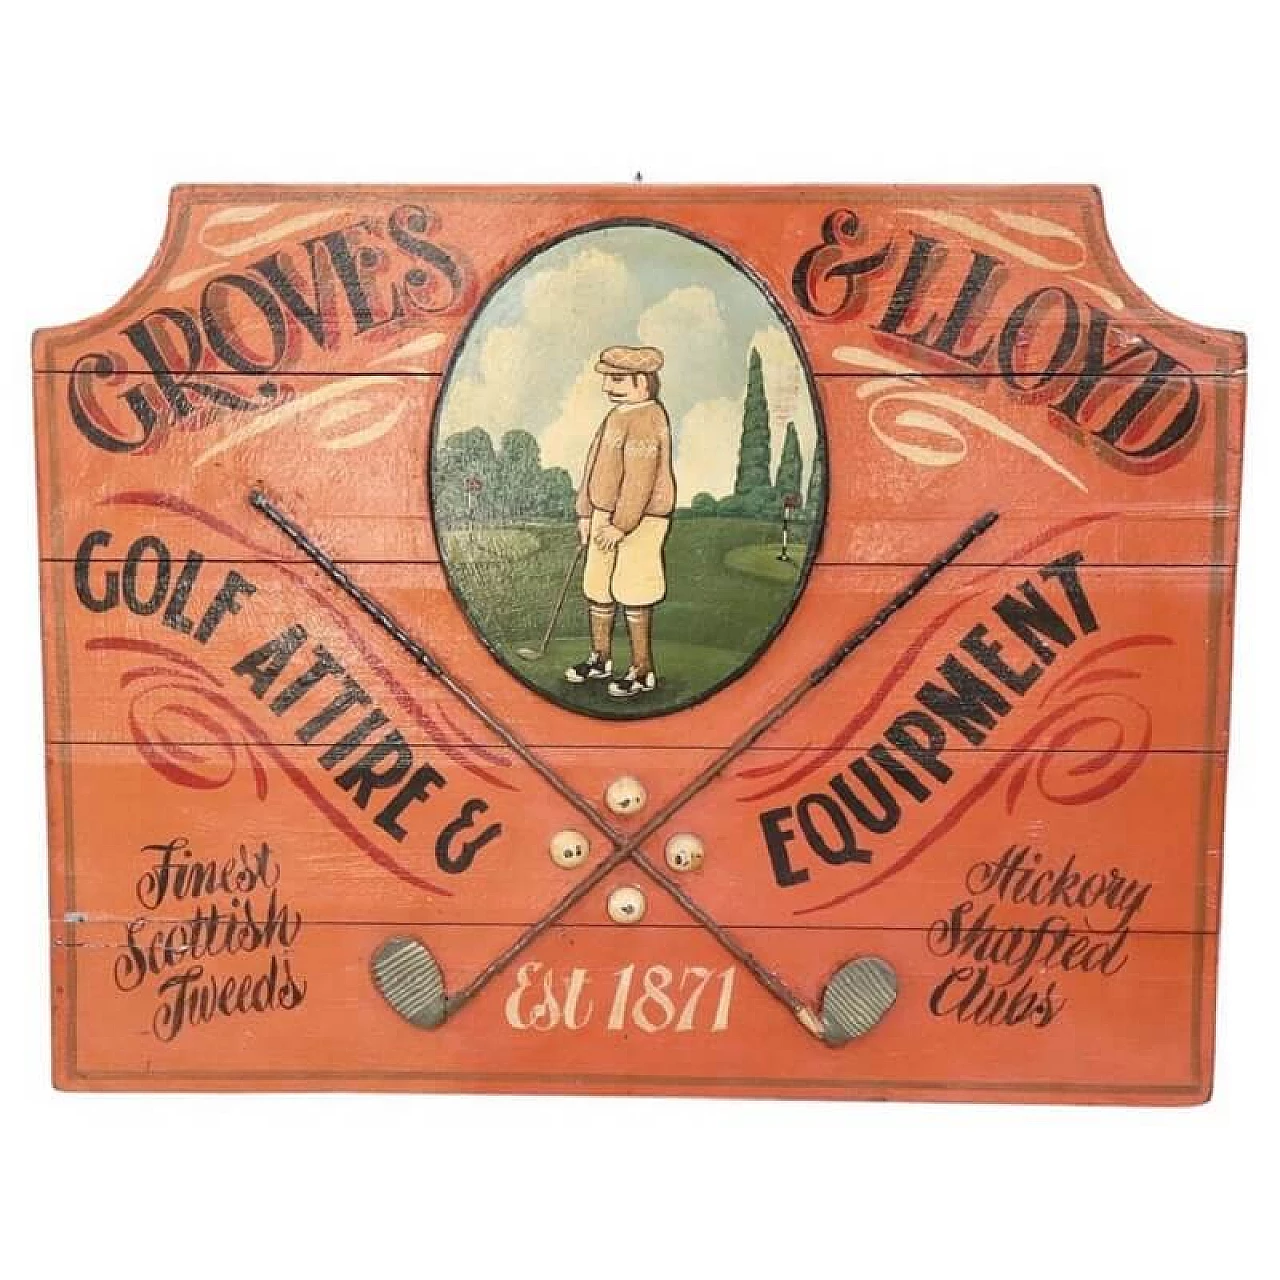 Hand-painted golf advertising sign on wood, 1920s 1